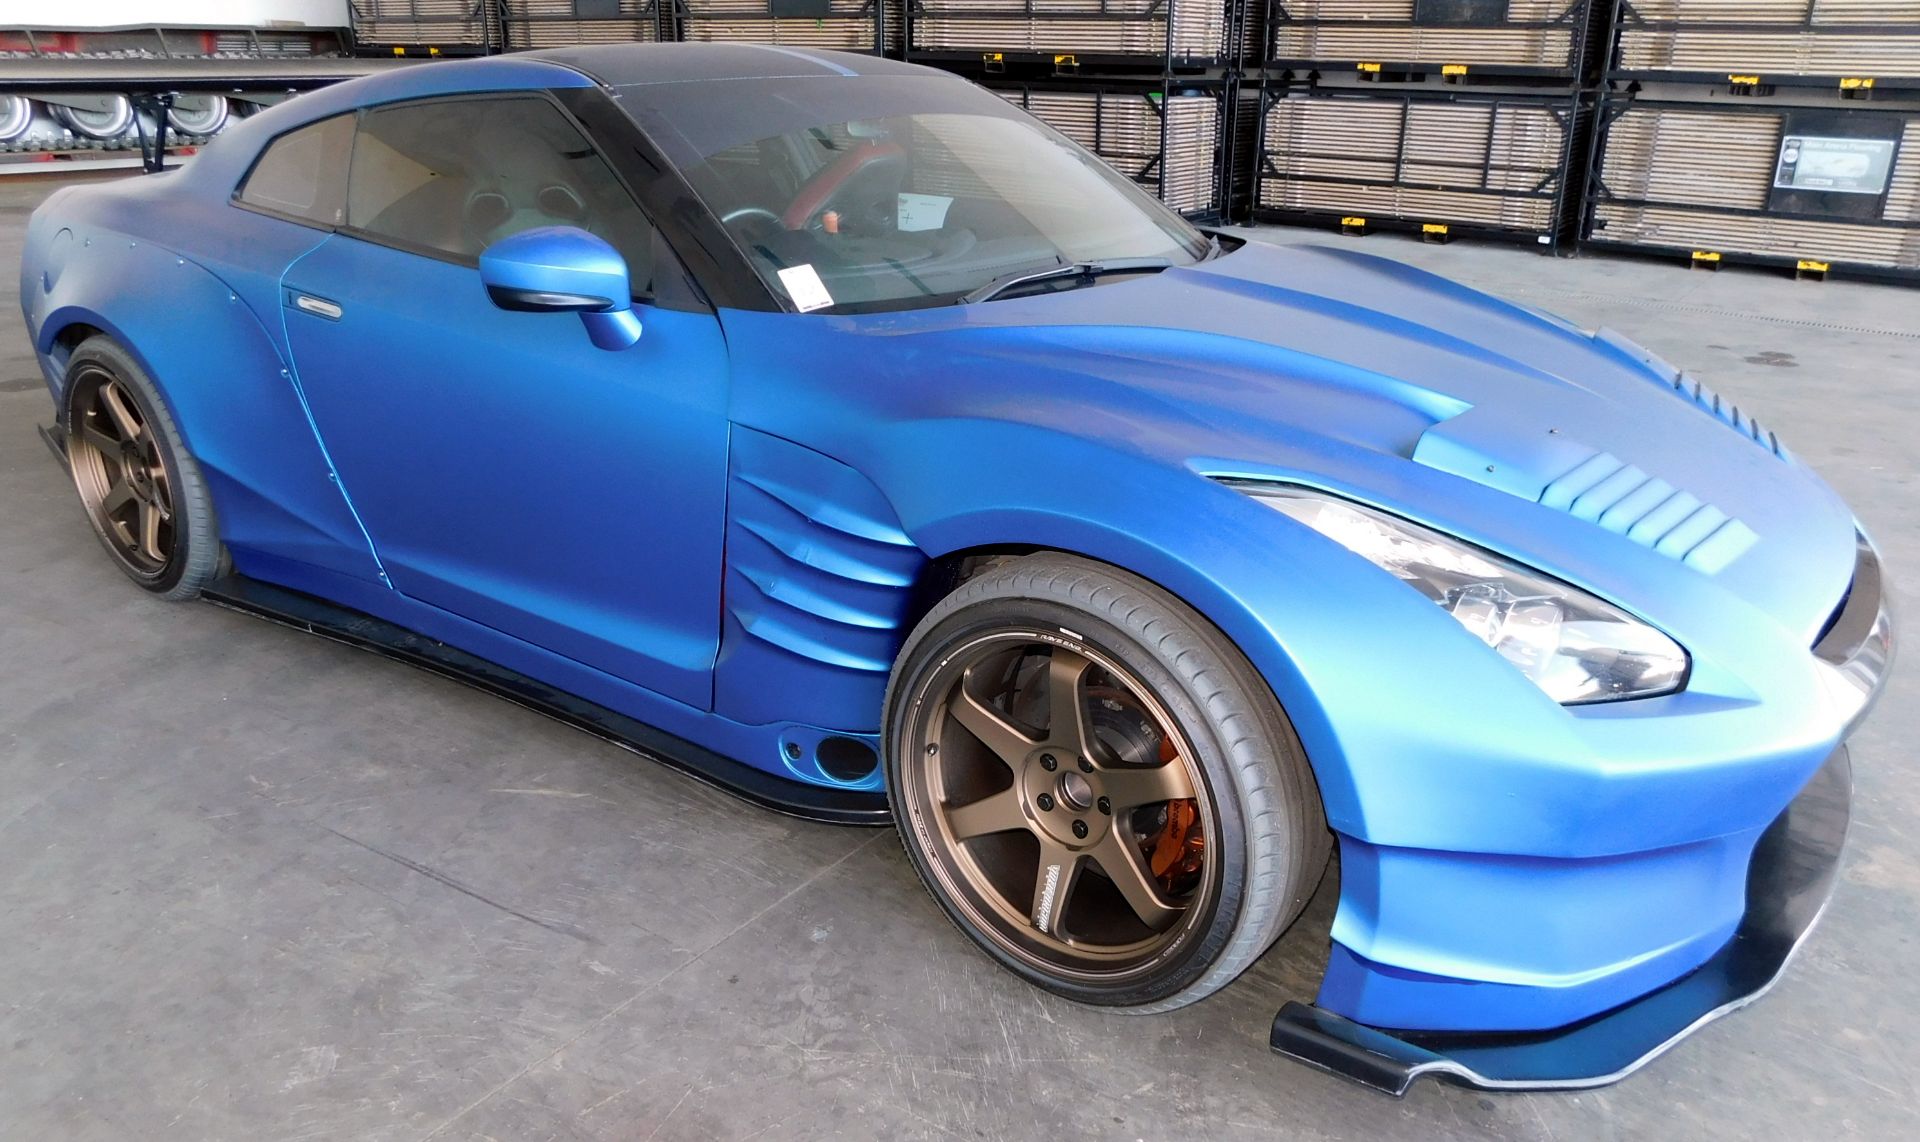 Nissan GTR 2 Door RHD Coupe, 3.8 Litre Engine, Manual Gearbox, Bensopera Body Kit, Not Road Legal, - Image 2 of 12